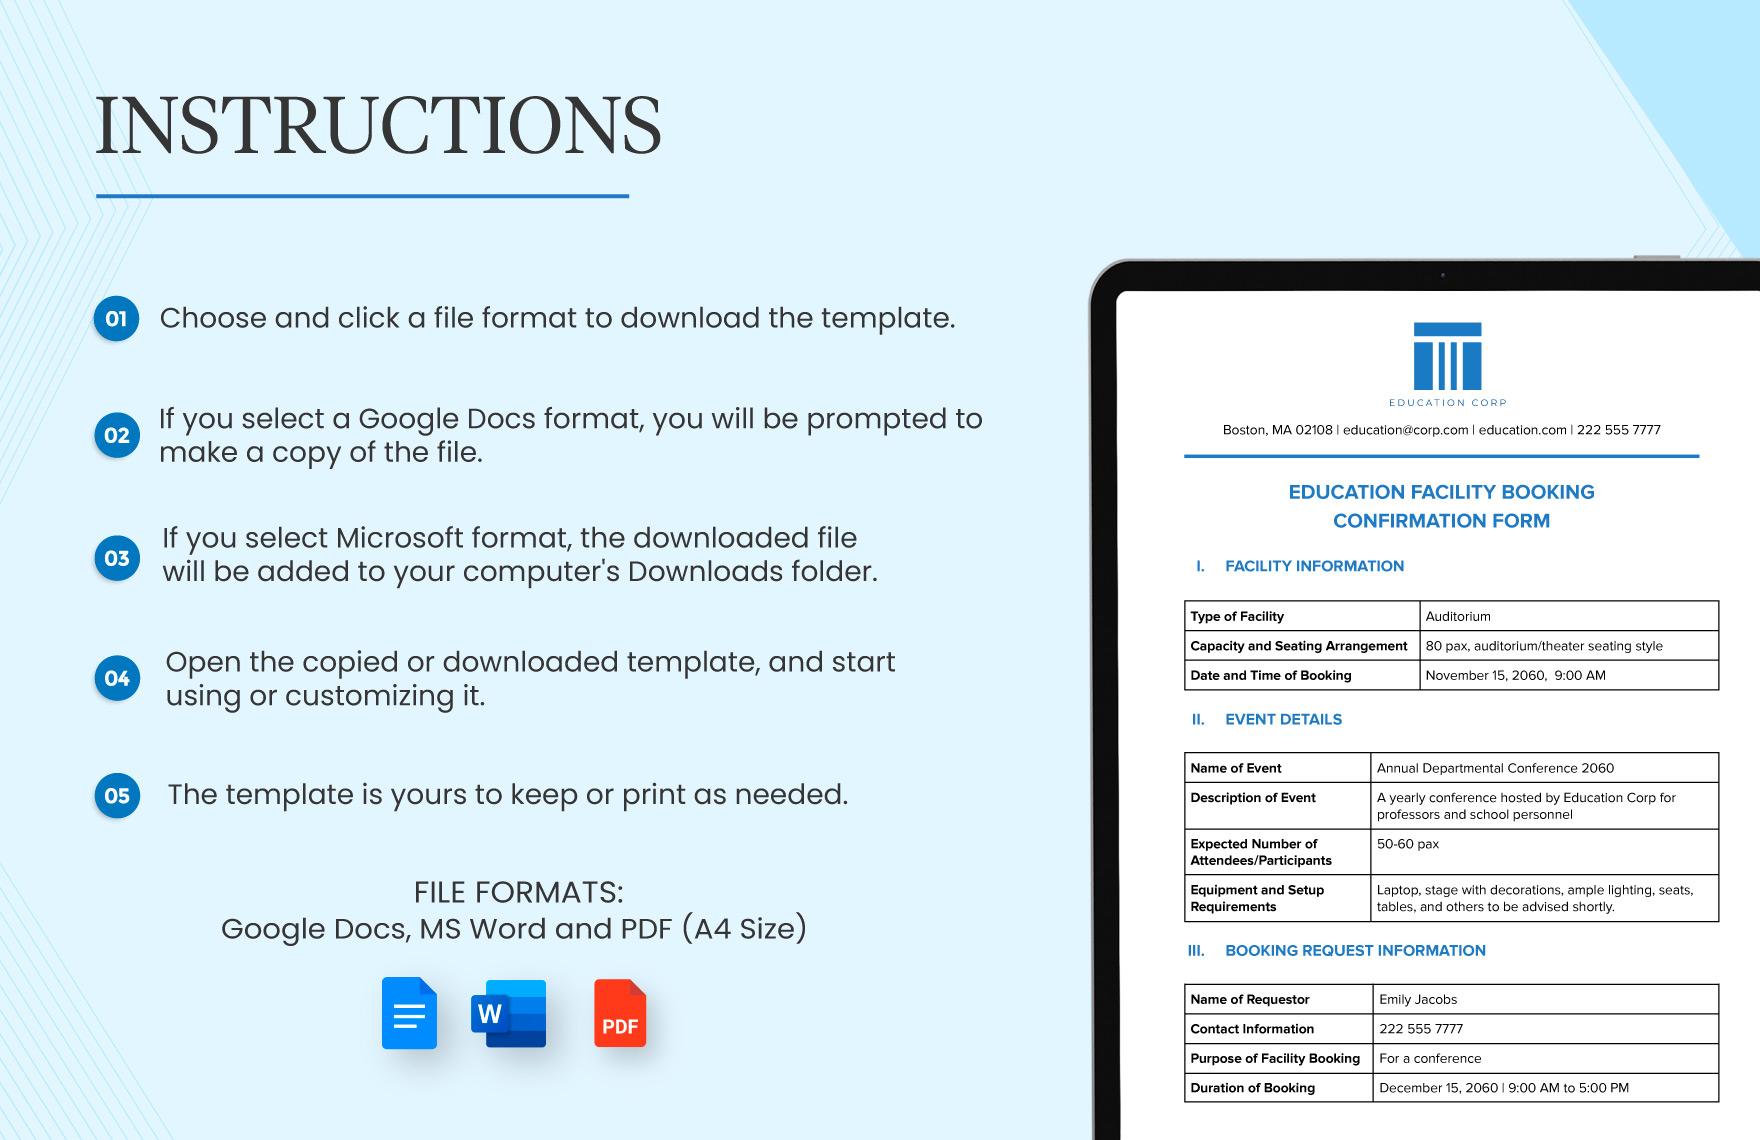 Education Facility Booking Confirmation Form Template